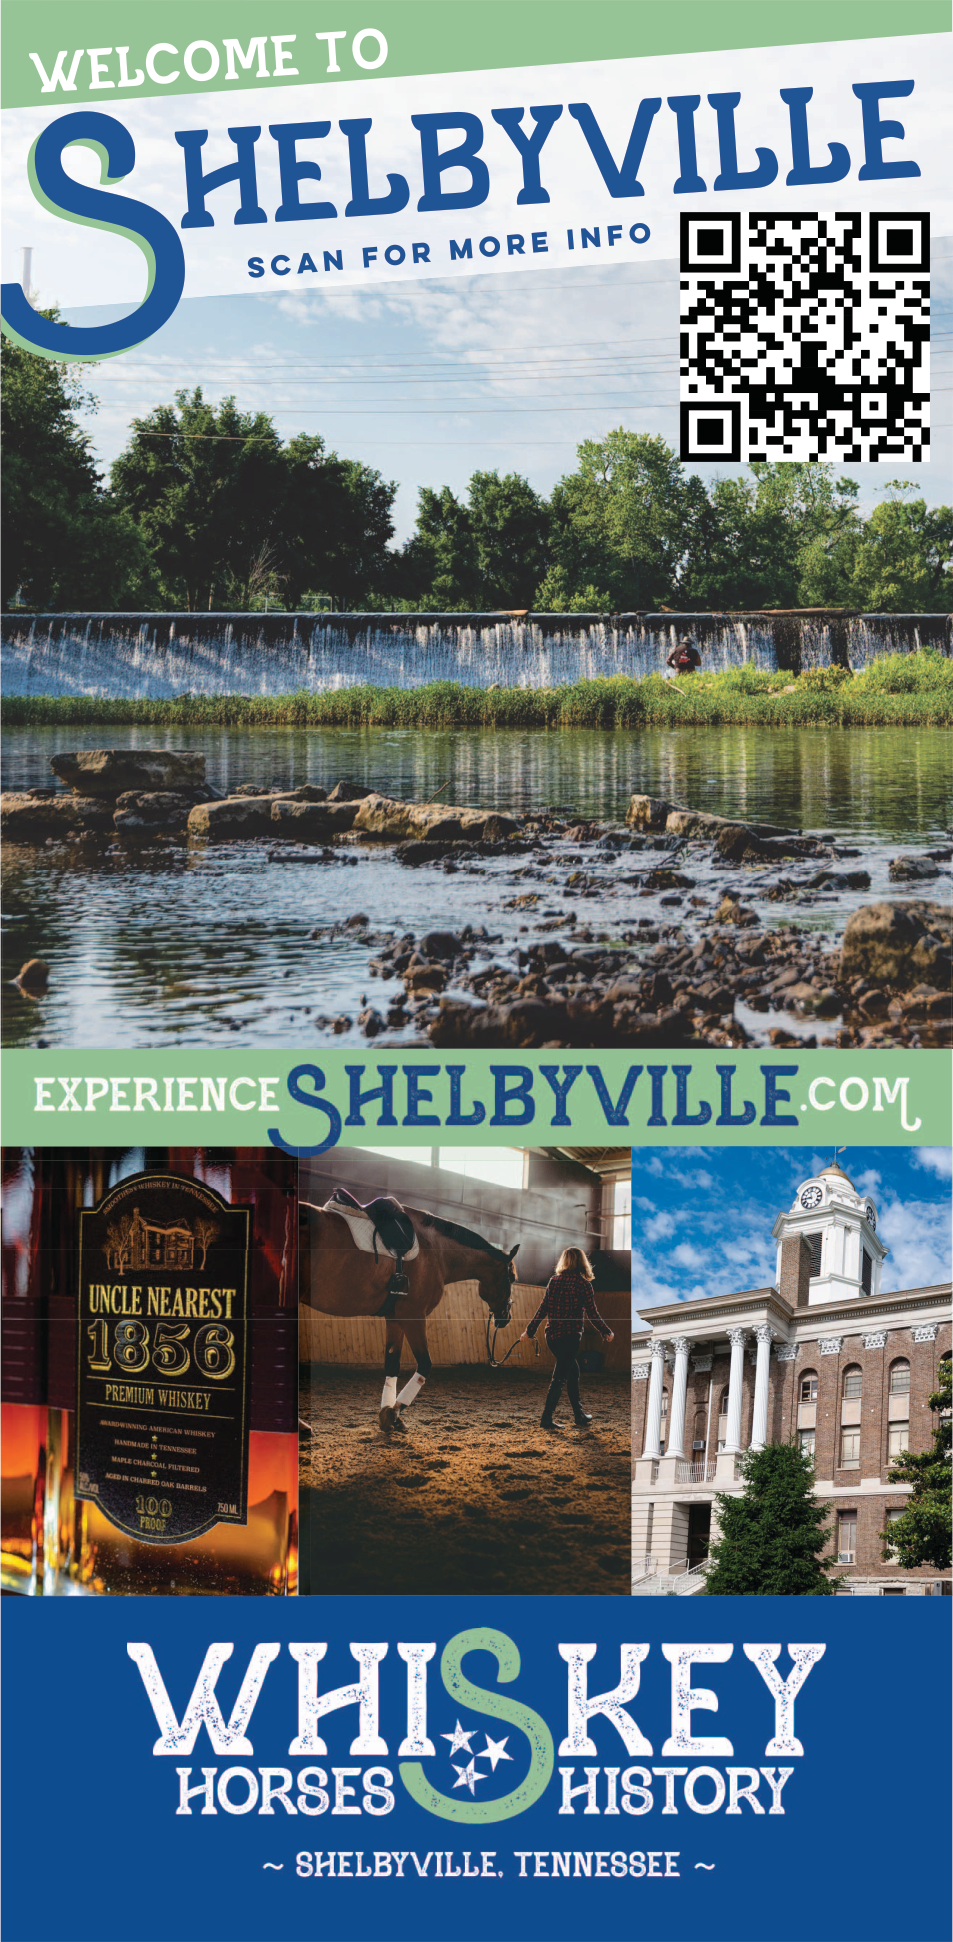 City of Shelbyville Print Ad